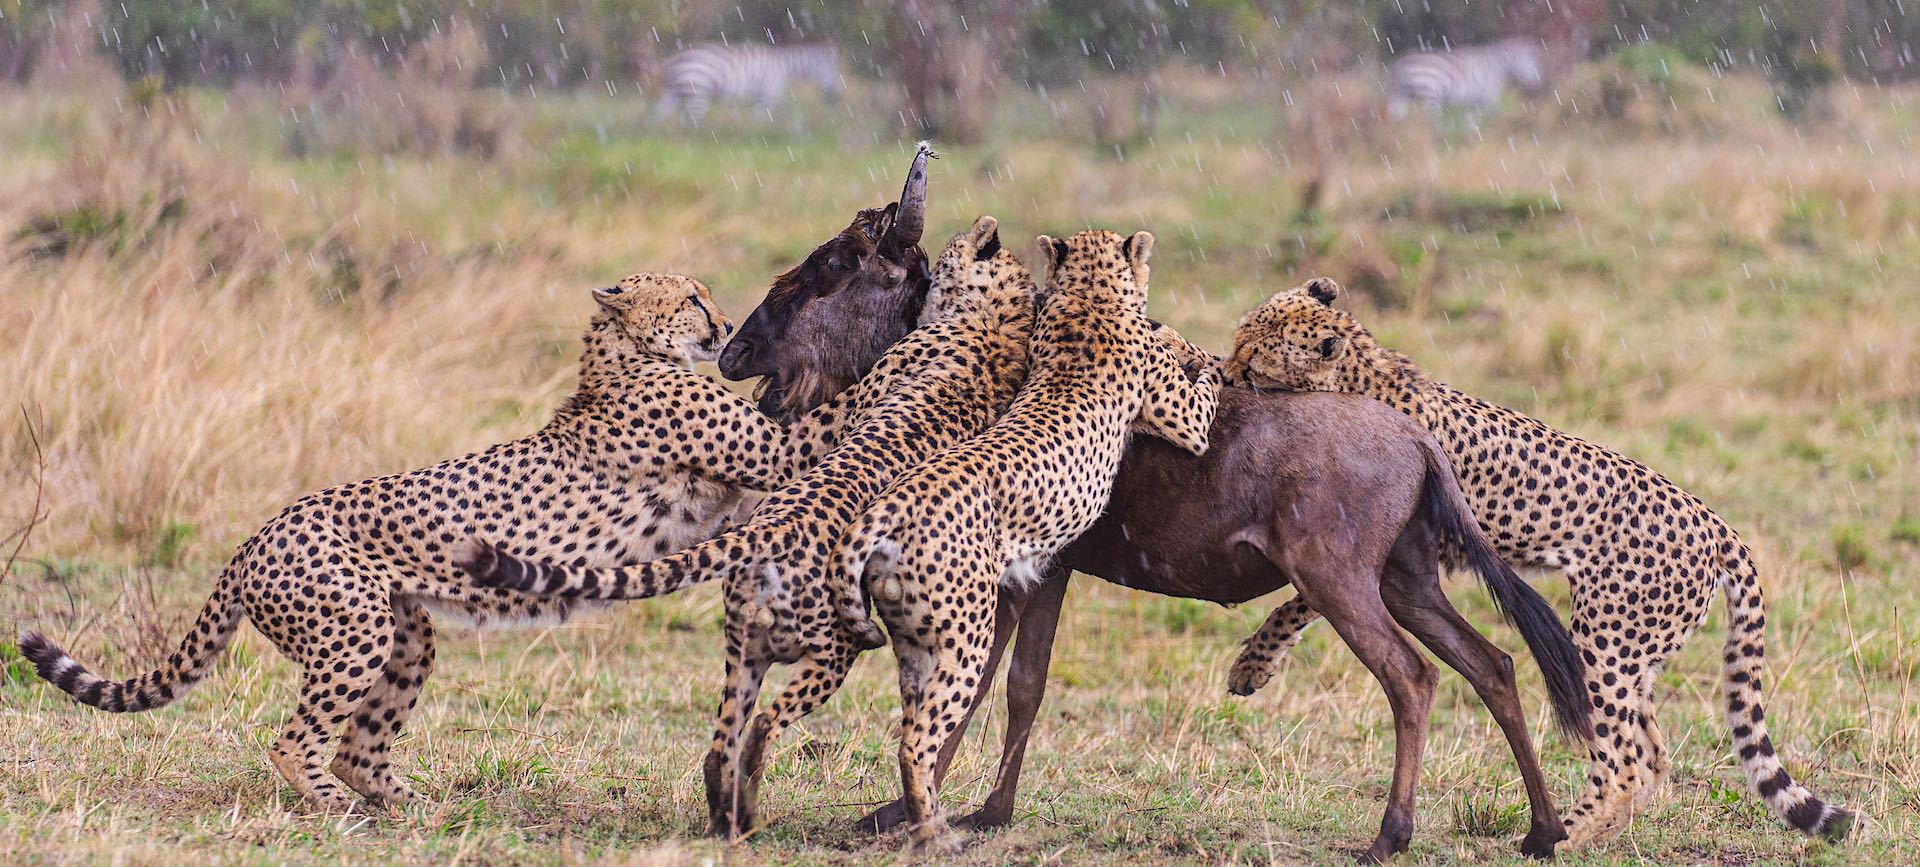 Nne Bora coalition attacking a wildebeest together as a team